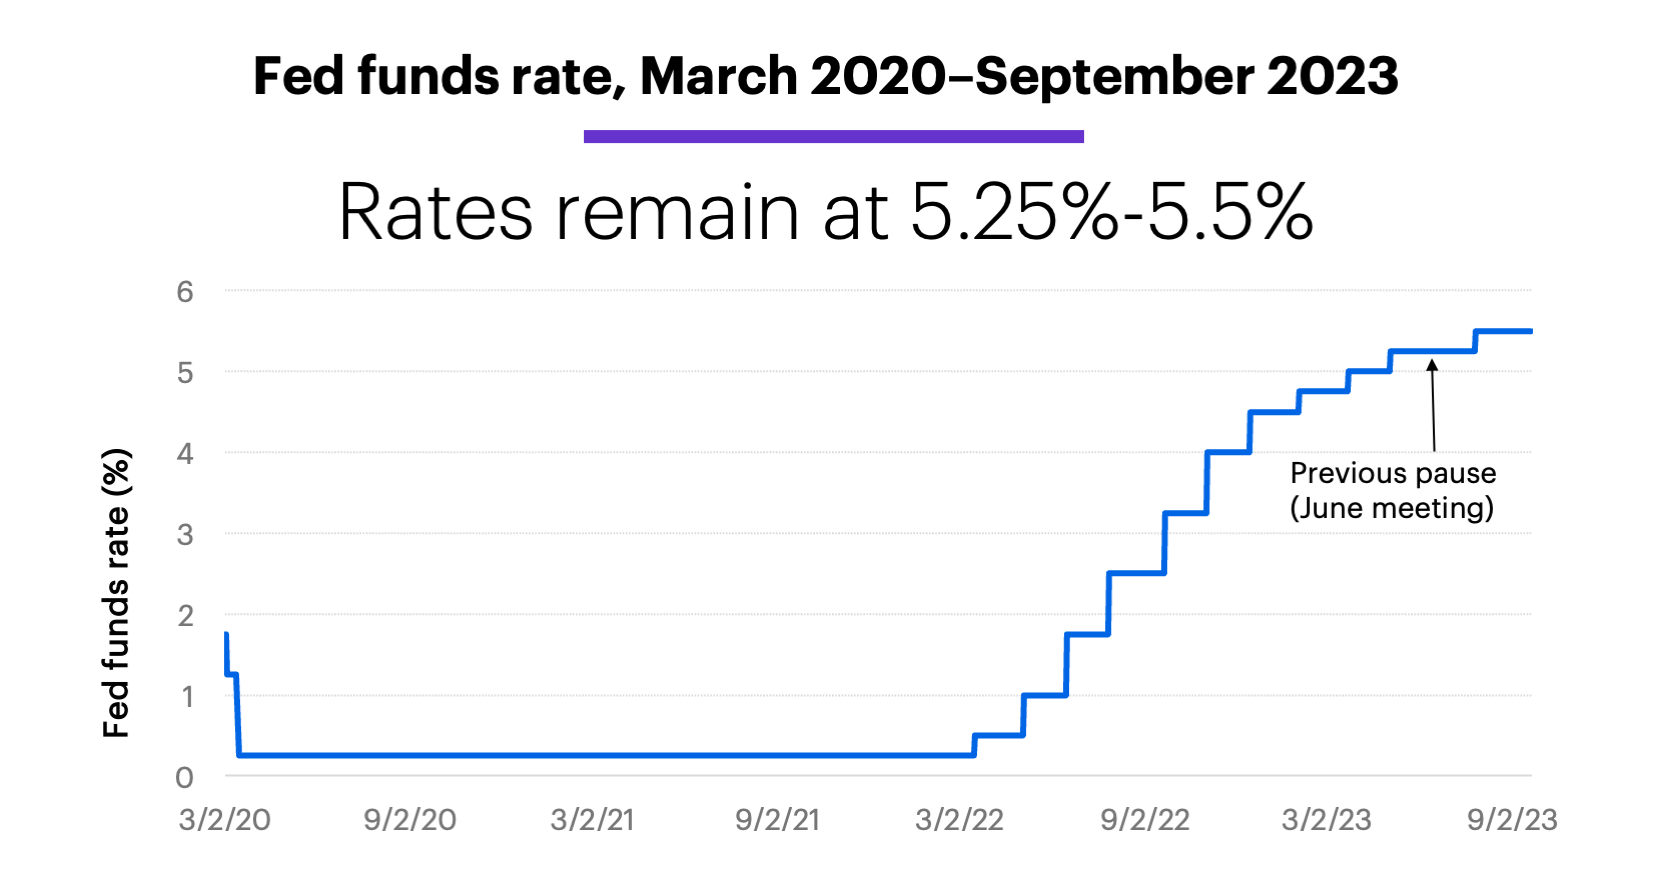 Chart 1: Fed funds rate, March 2020–September 2023. Rates remain at 5.25%-5.5%.